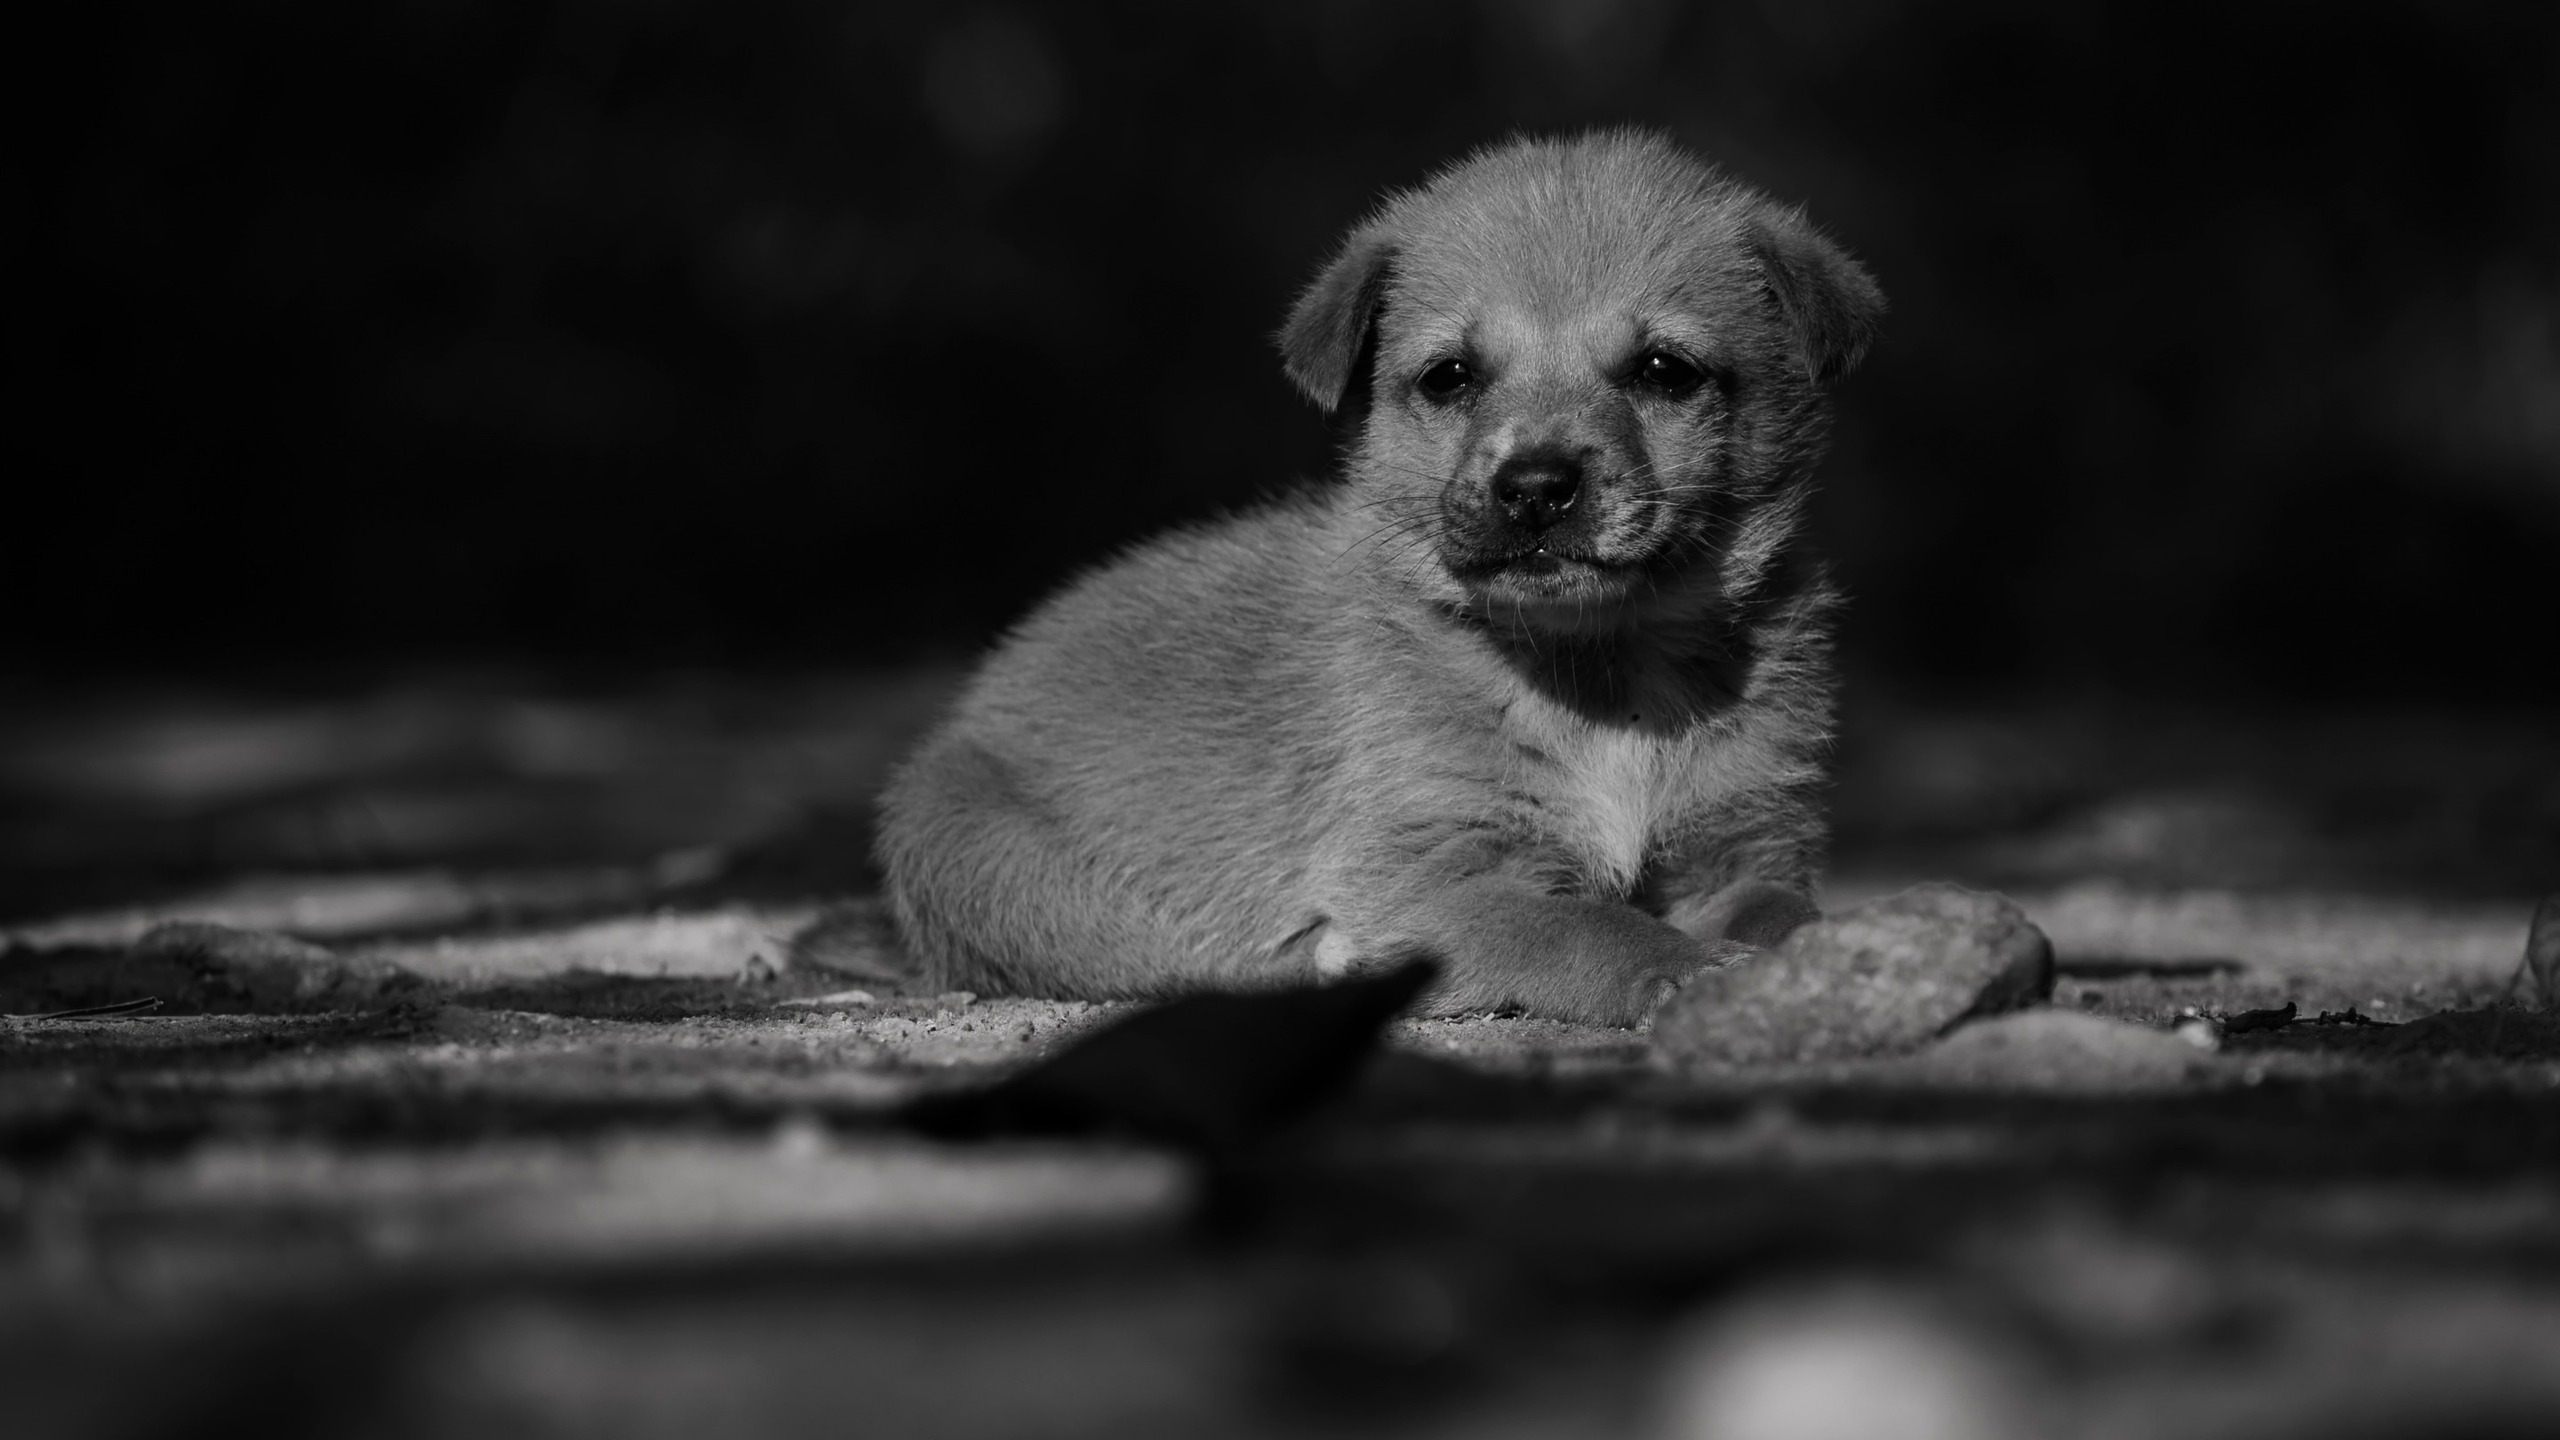 Adorable Lonely Puppy for 2560x1440 HDTV resolution